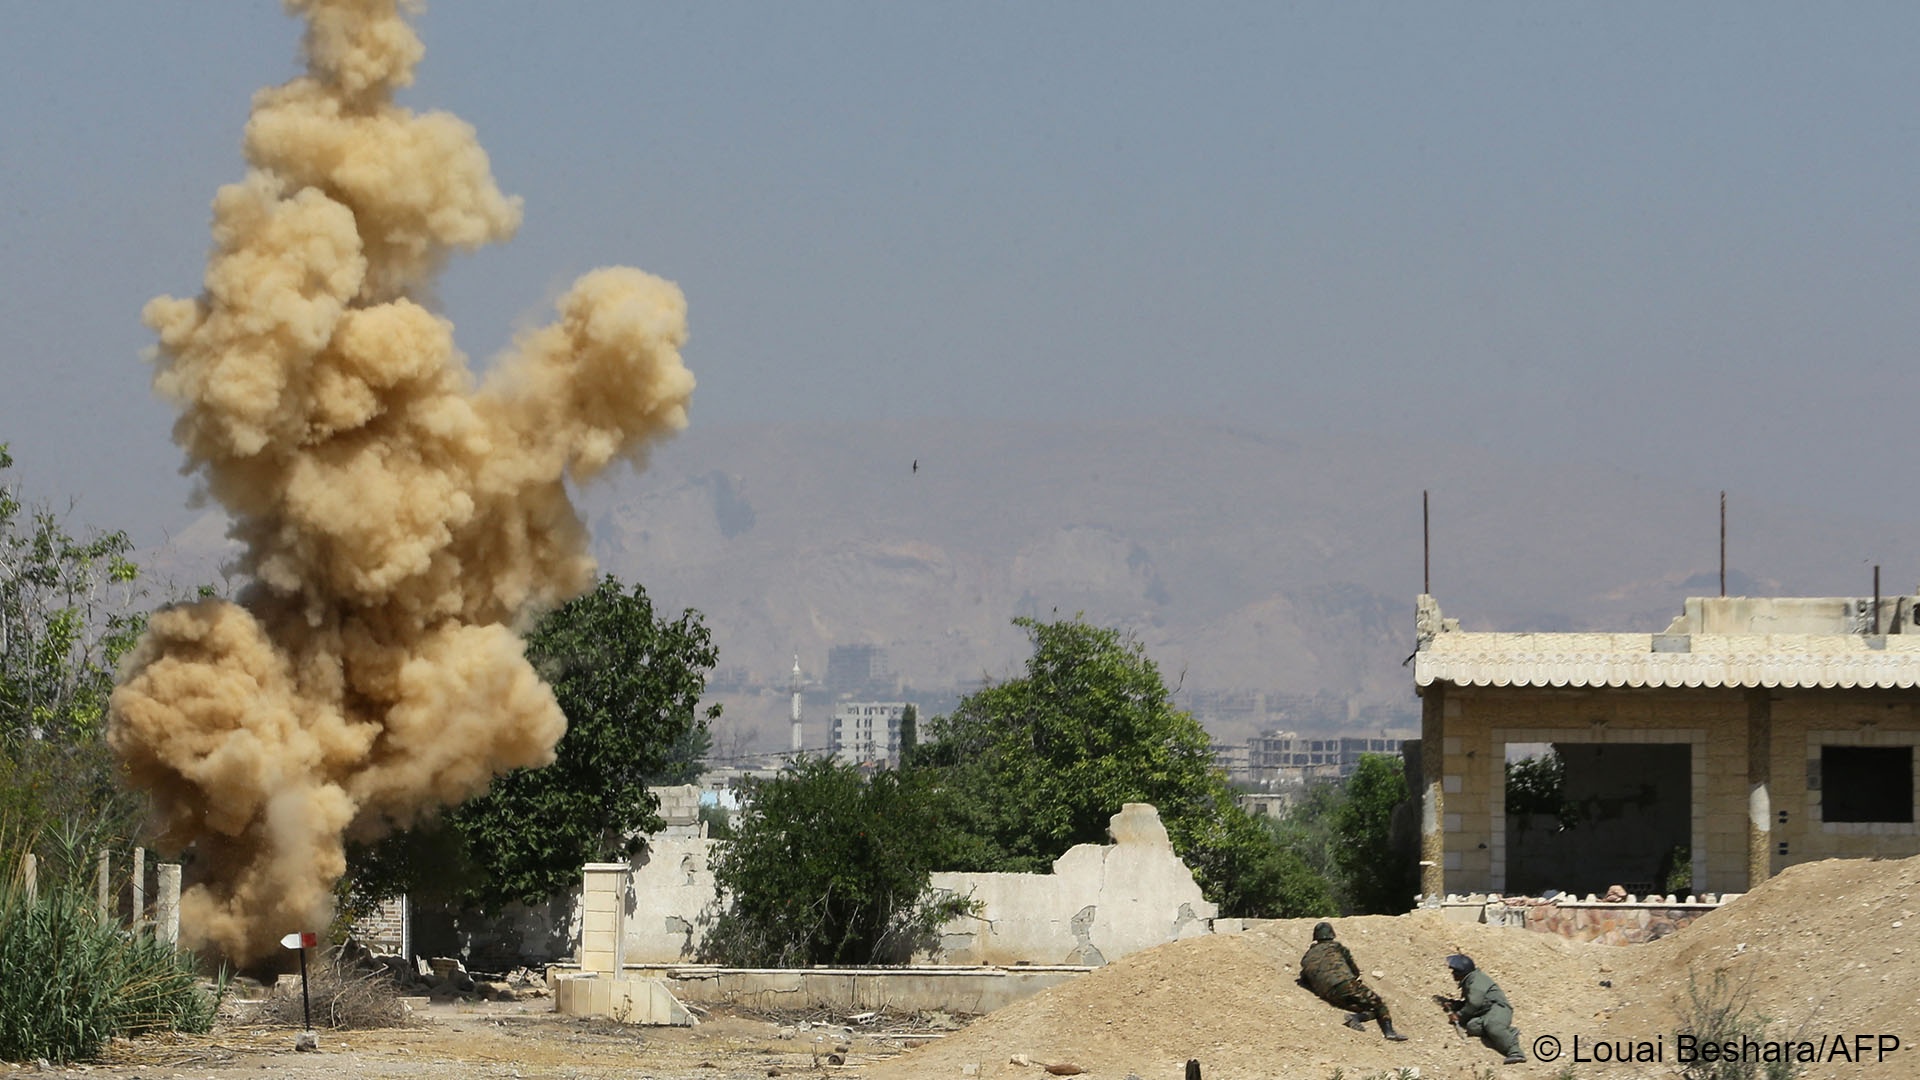 Ordnance is blown up during a training session to clear munitions in the countryside near the Syrian capital Damascus (photo: LOUAI BESHARA/AFP) 